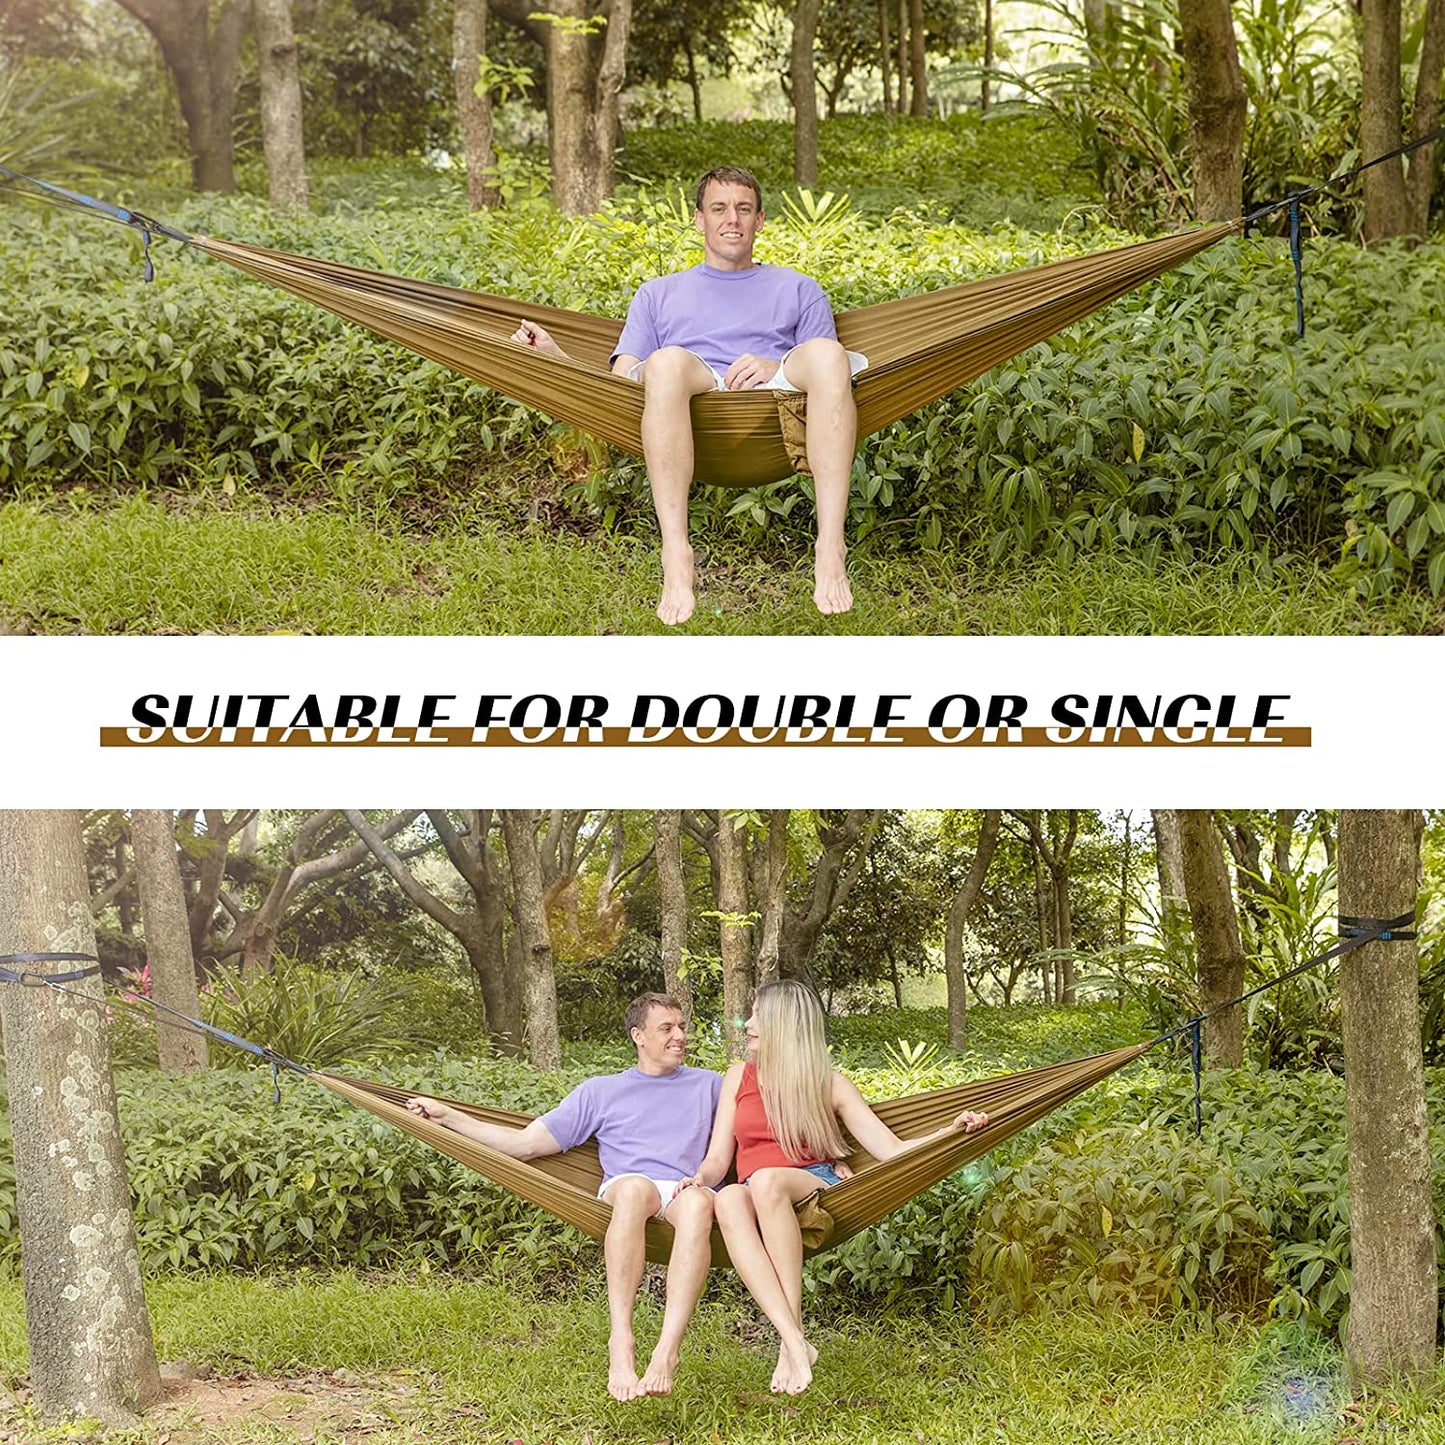 Skymirror Outdoor Multi-Person Swing Hammock 270 X 140 Cm, Load Capacity up to 250 Kg, Portable with Carrying Bag for Patio, Yard, Garden